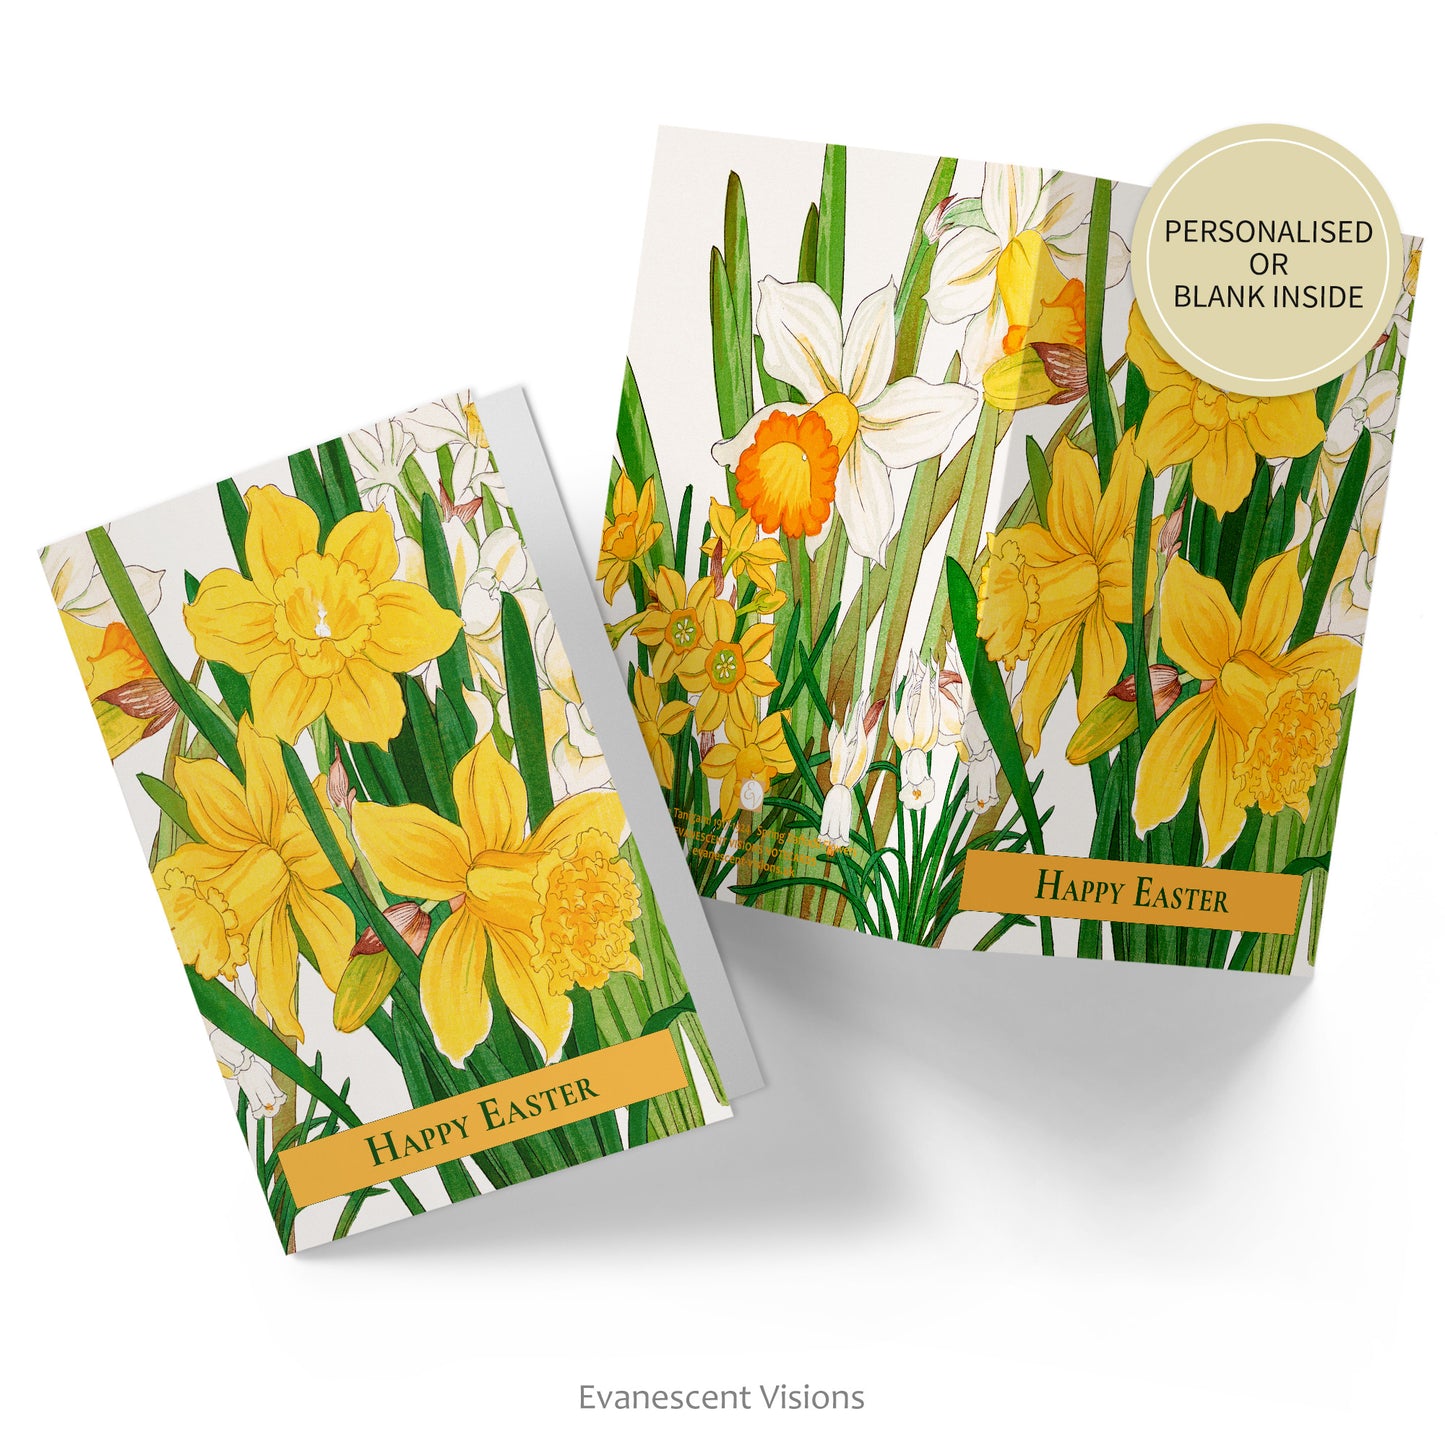 Wraparound design floral Easter card shown open printed front and back and closed with images from a woodblock design of daffodils by Kônan Tanigami. Sticker says personalised or blank inside.